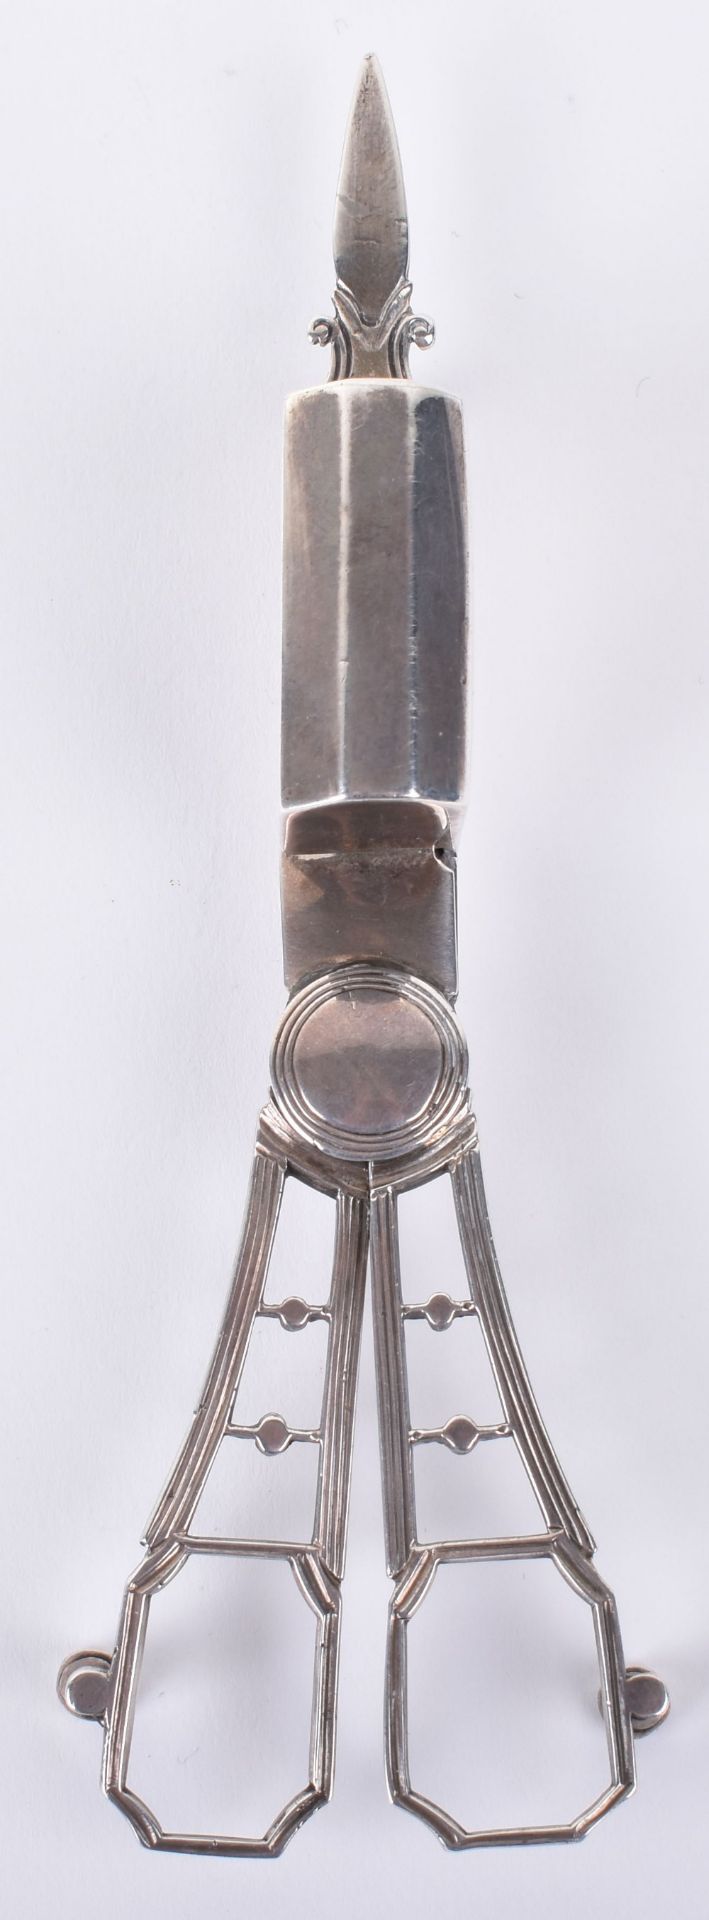 A George III silver snuffer, by Wilkes Booth, London 1806 - Image 3 of 6